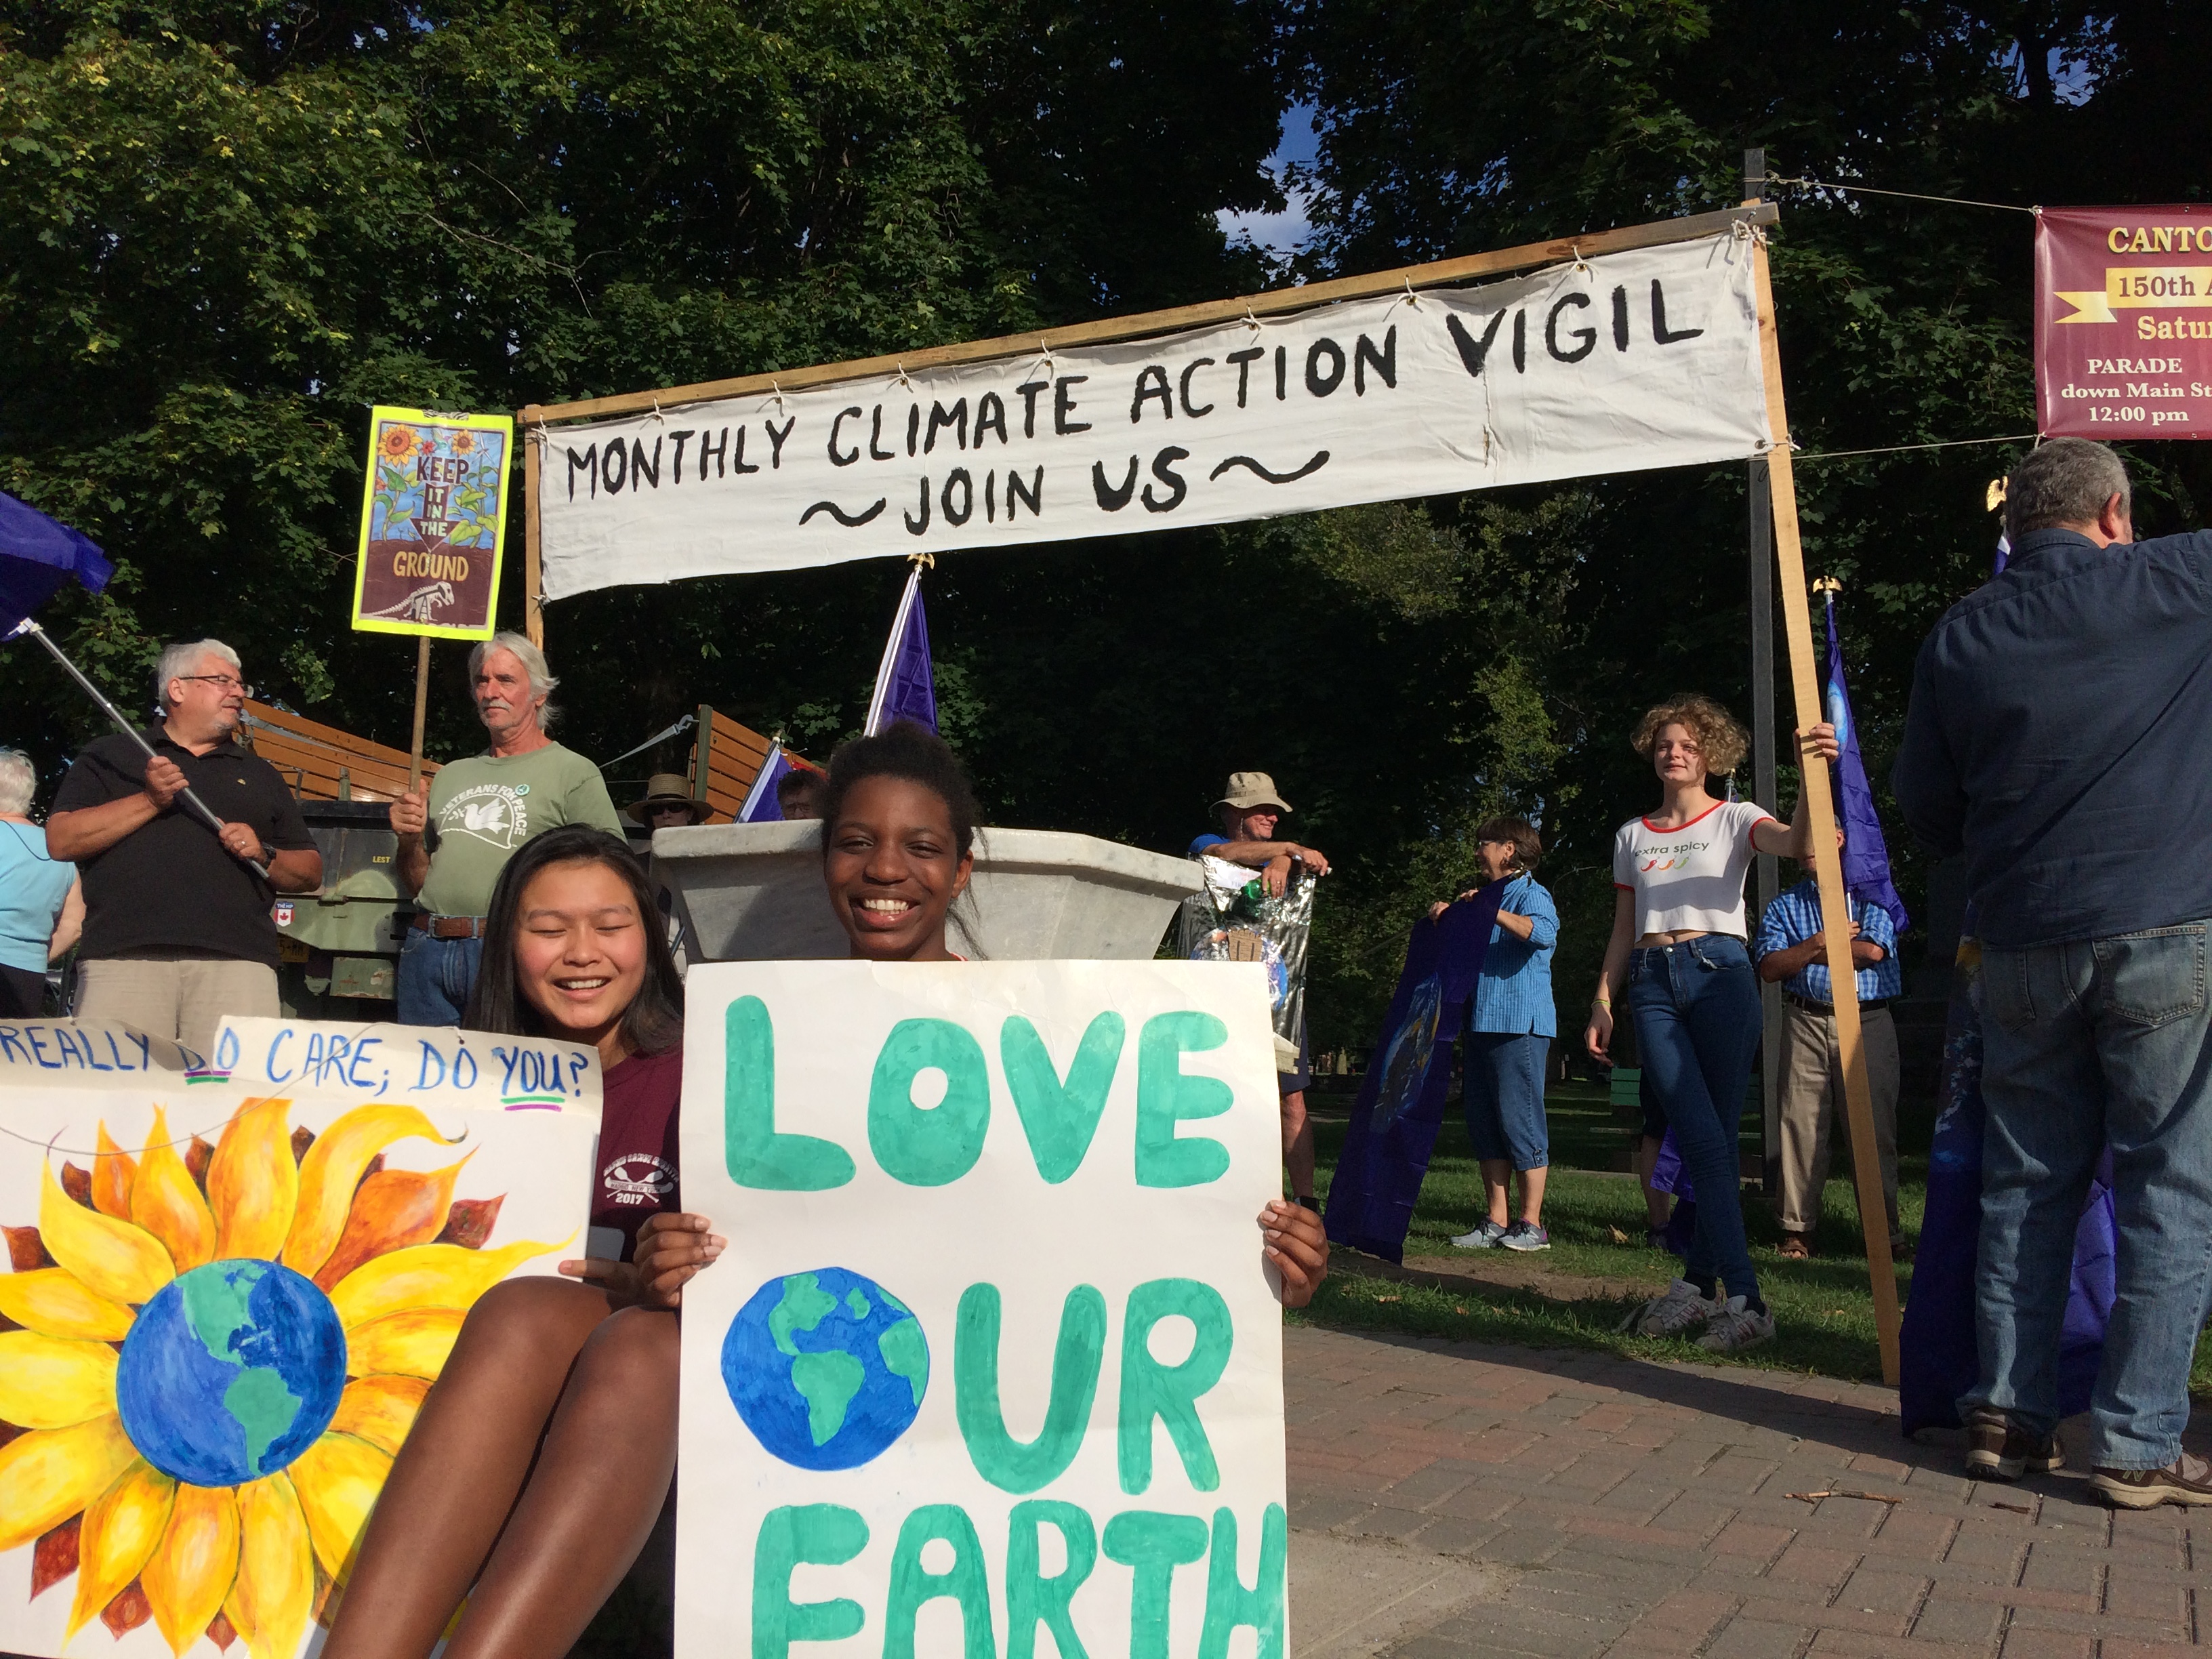 Protesters held homemade signs at the September Monthly Climate Action Vigil.